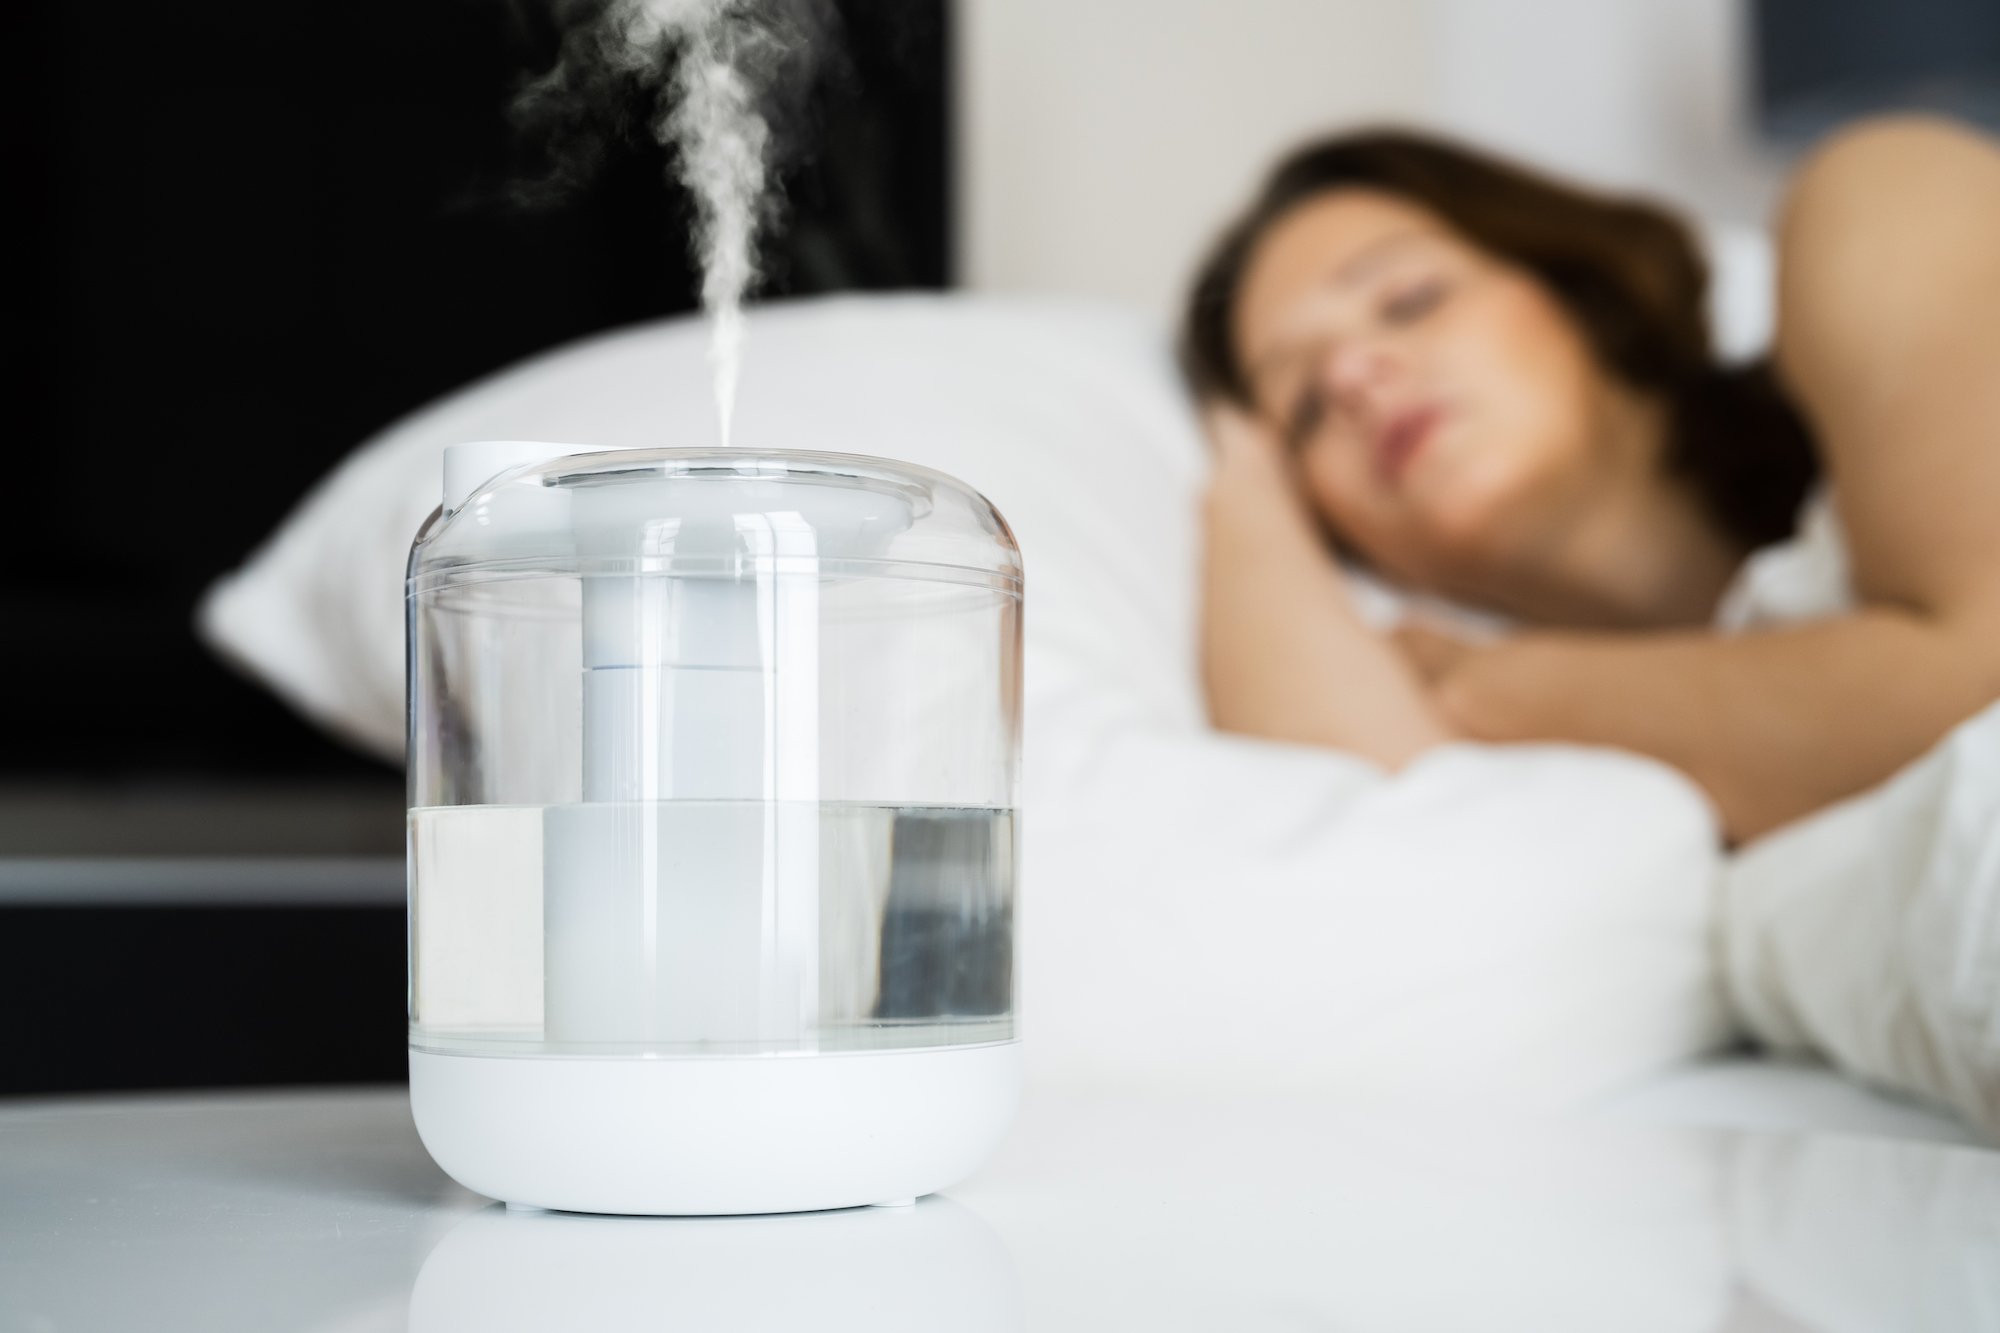 How to Clean a Humidifier, According to an Expert